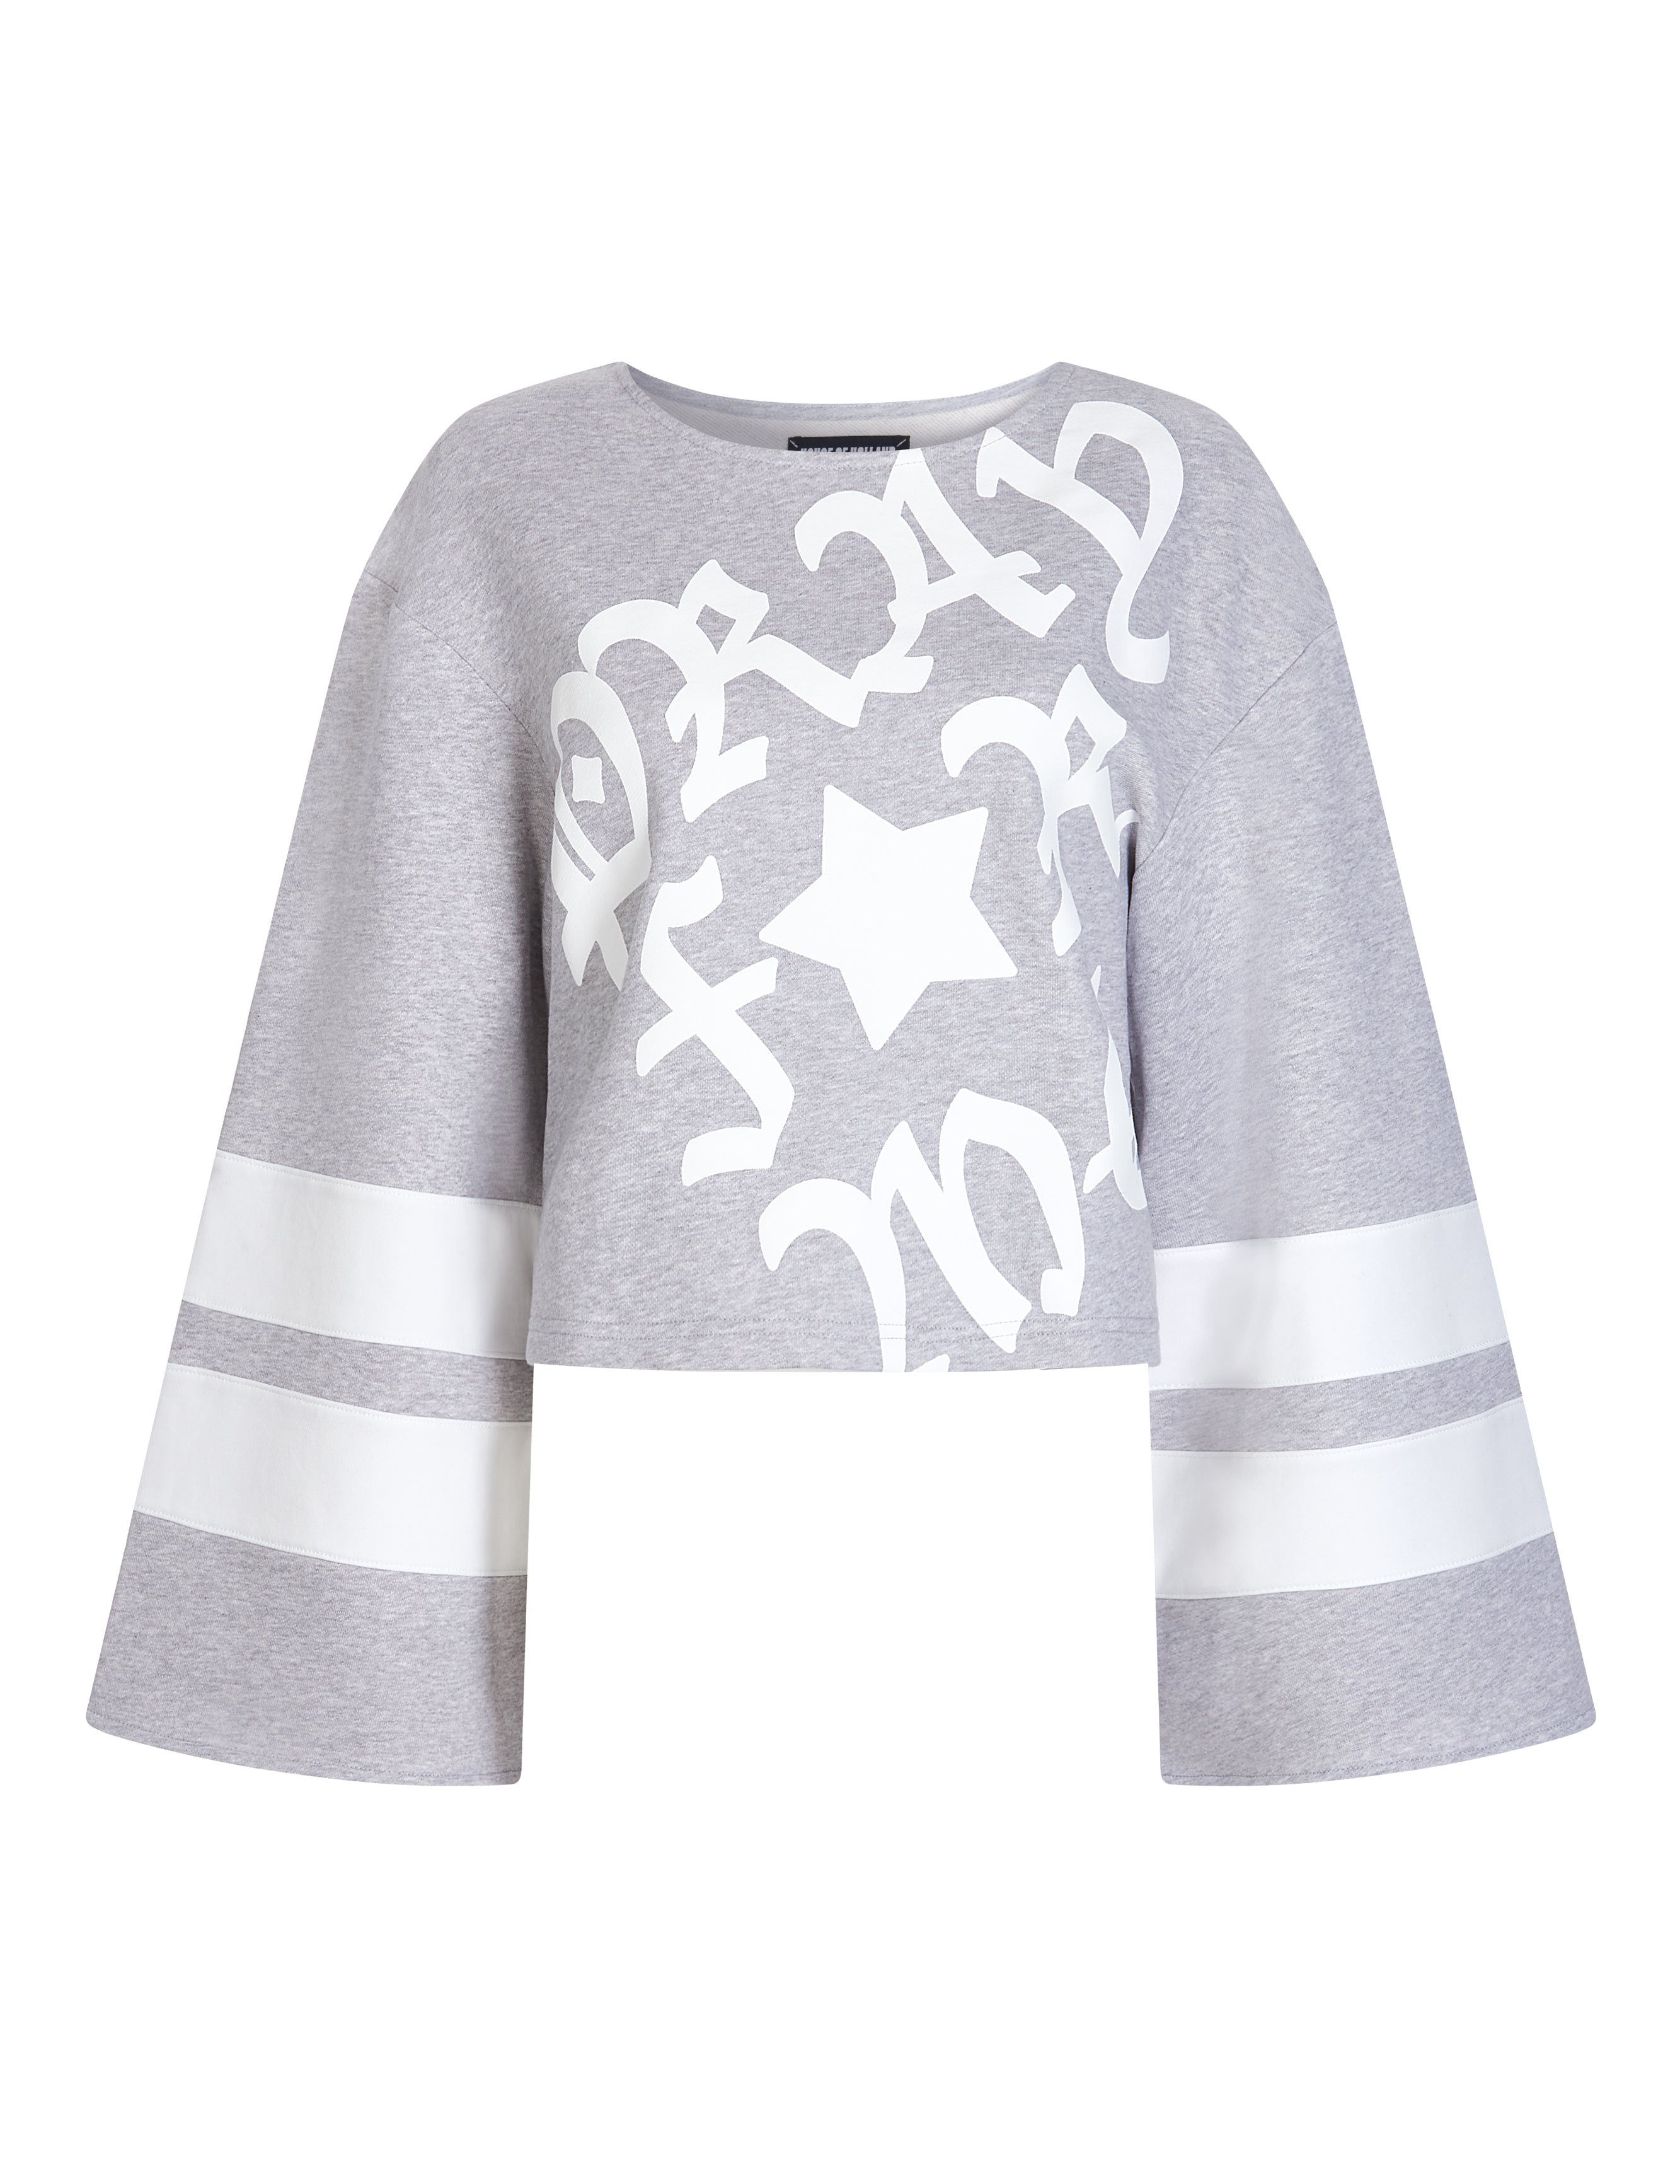 Grey 'Pray for Me' Cropped Sweatshirt by House of Holland